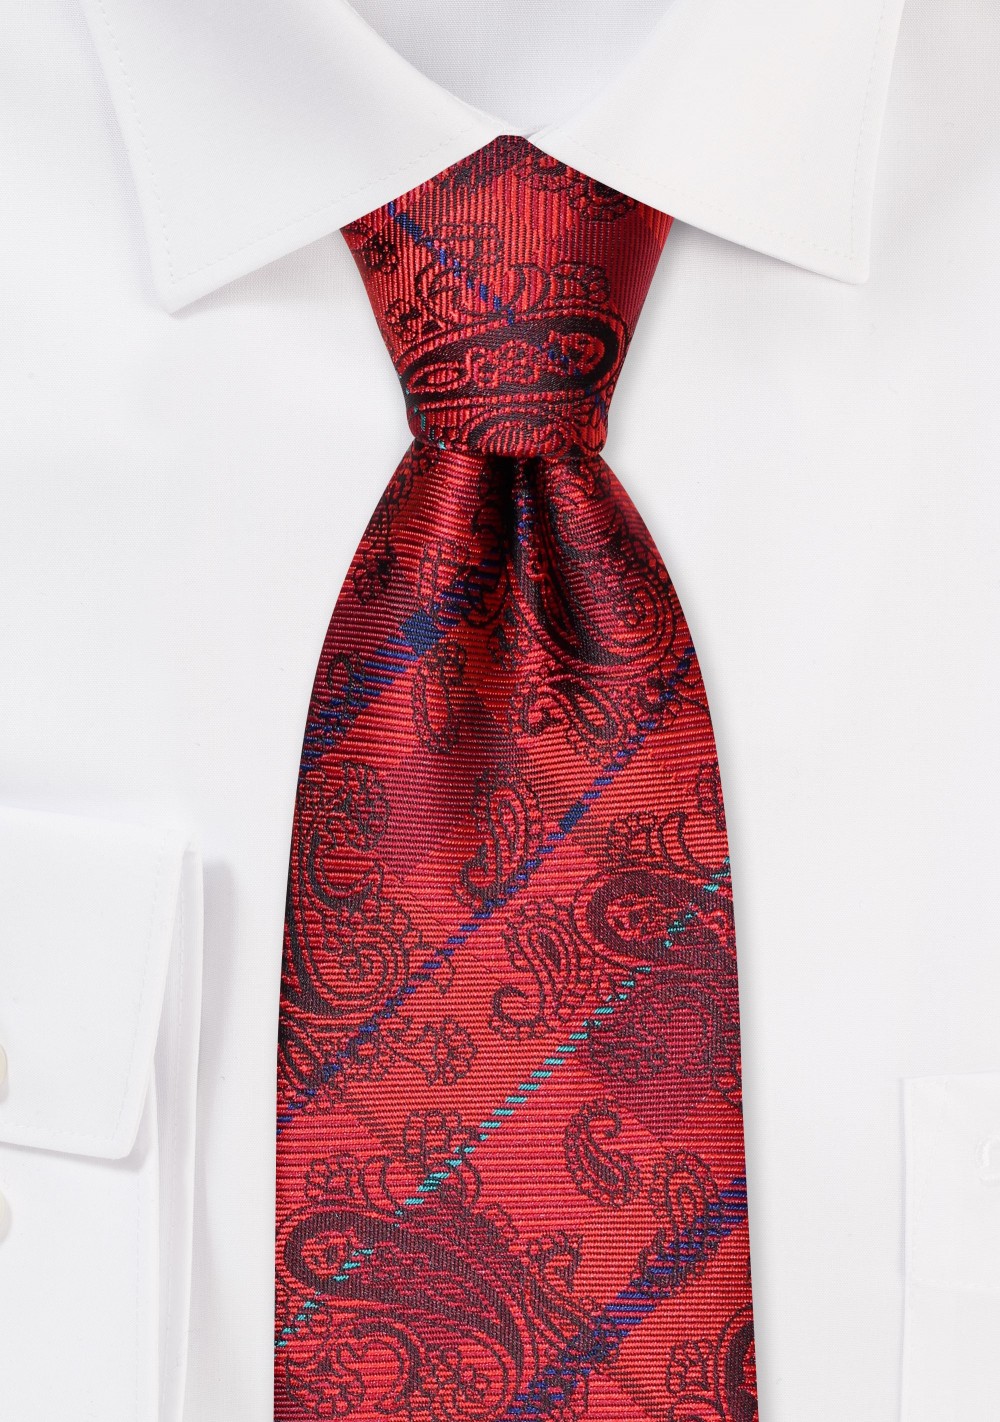 Paisley Check Tie in Chili Red